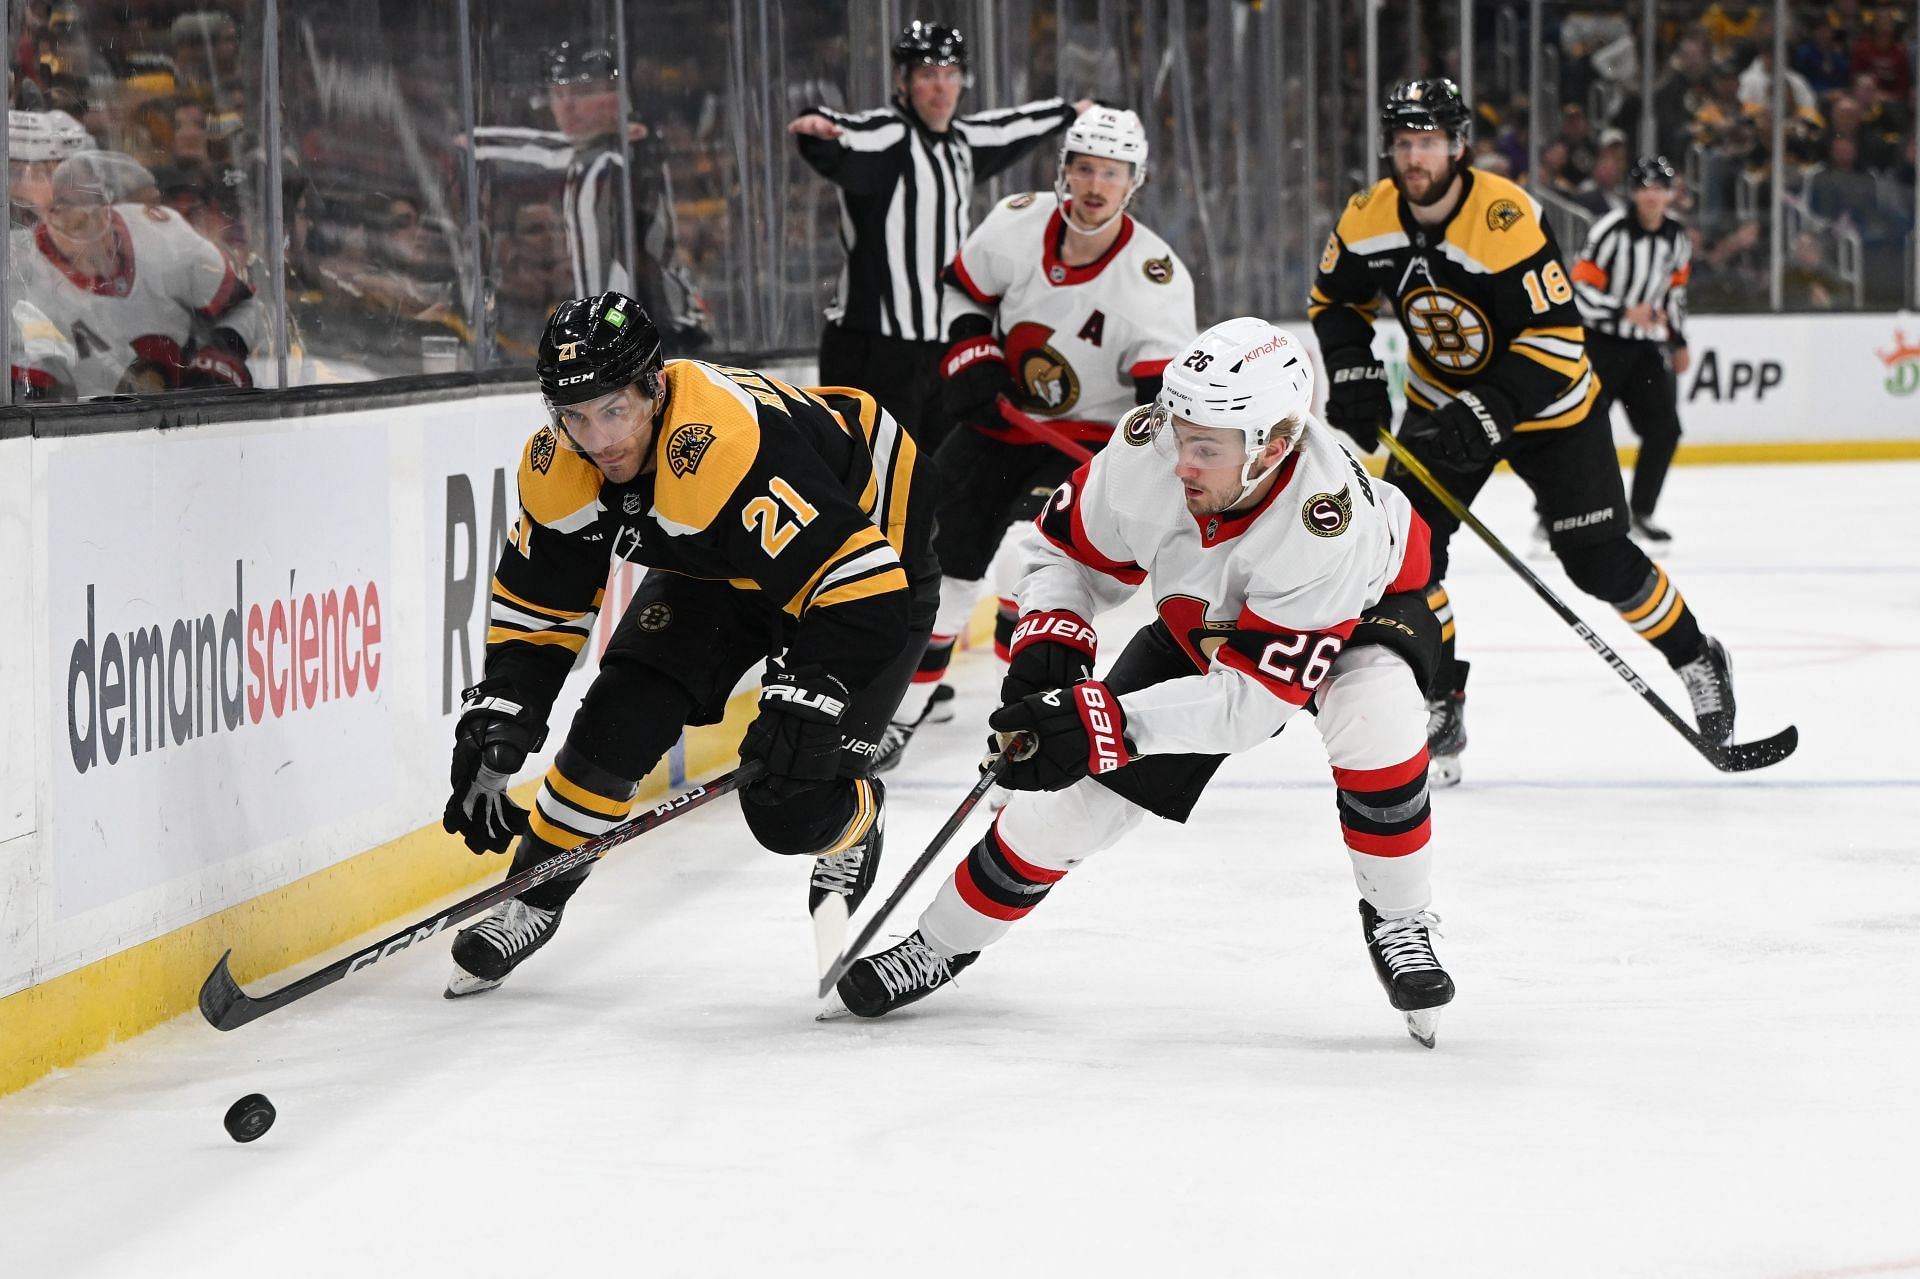 NHL Games Today TV Schedule, channel, time, and live stream details